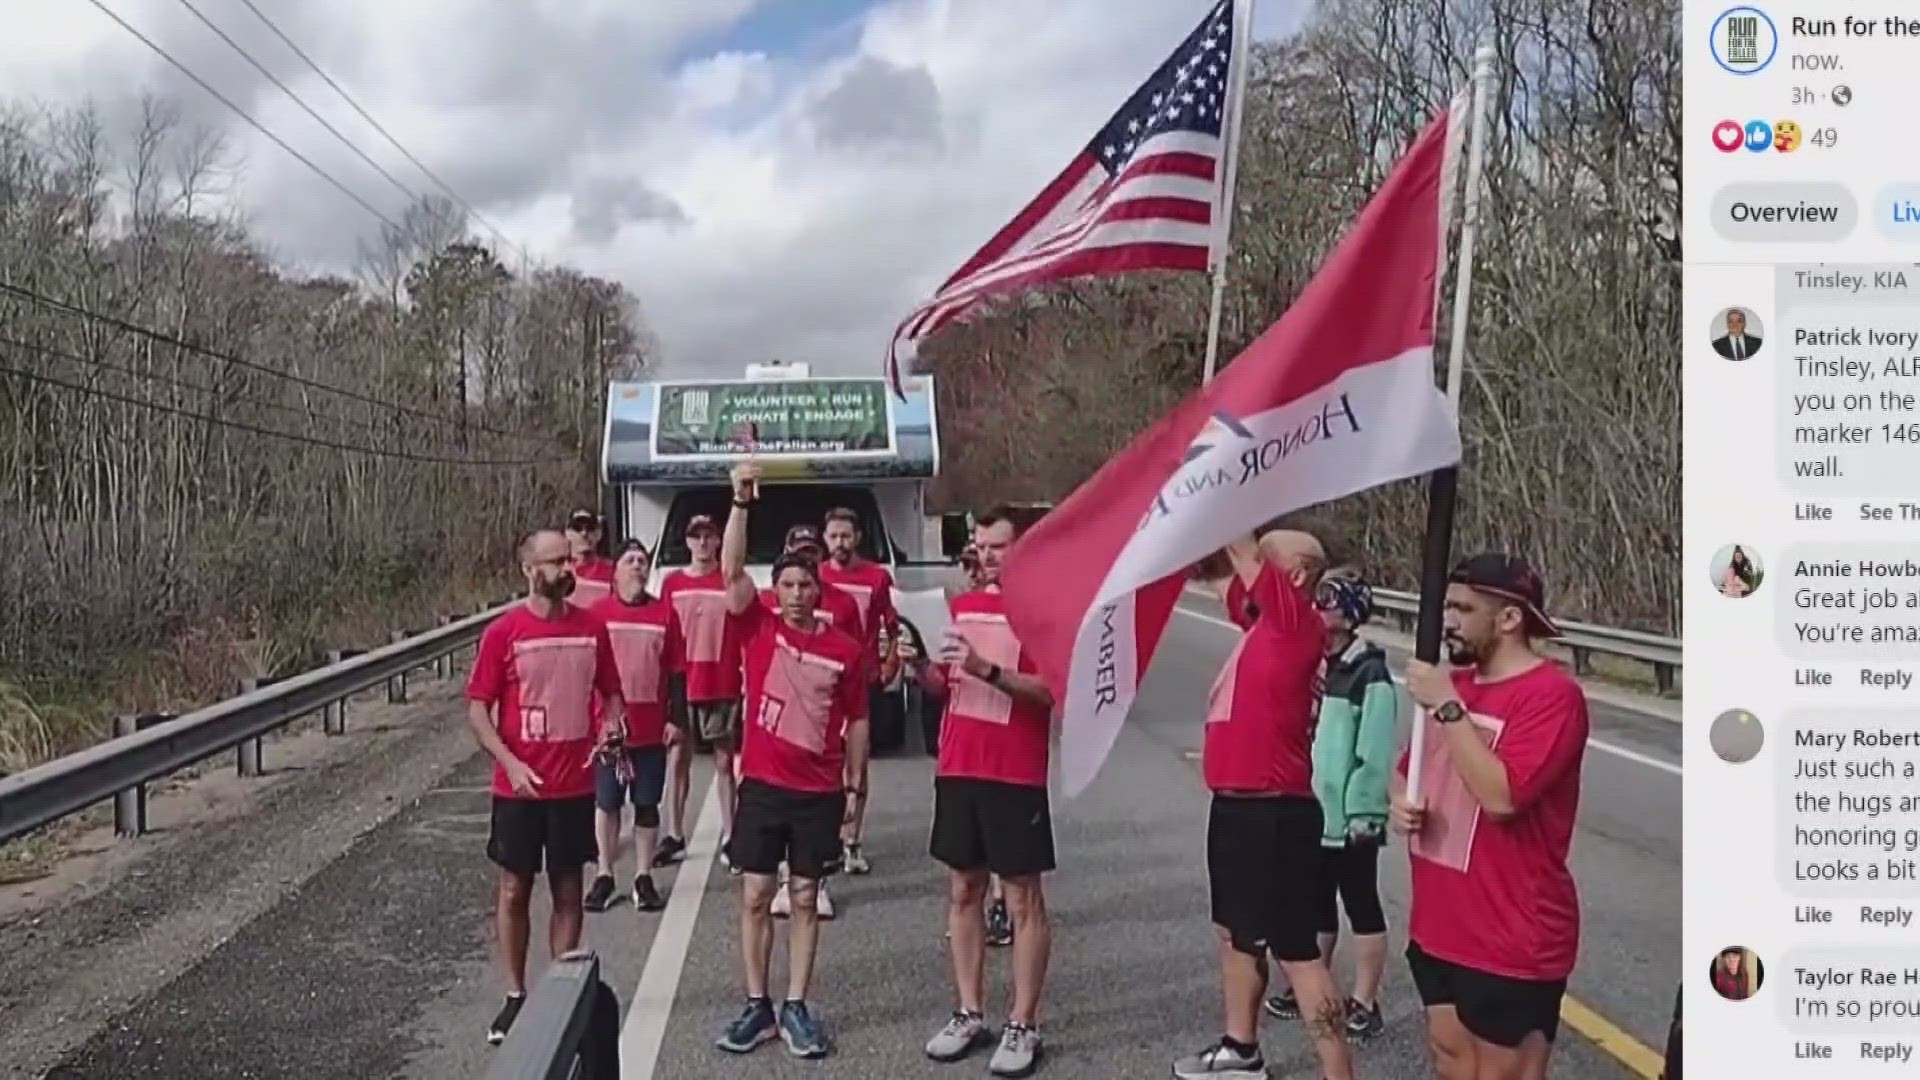 Starting Friday, Feb. 9, a group will run from Tallahassee to Jacksonville and stop every mile to honor Florida servicemembers who died serving the United States.